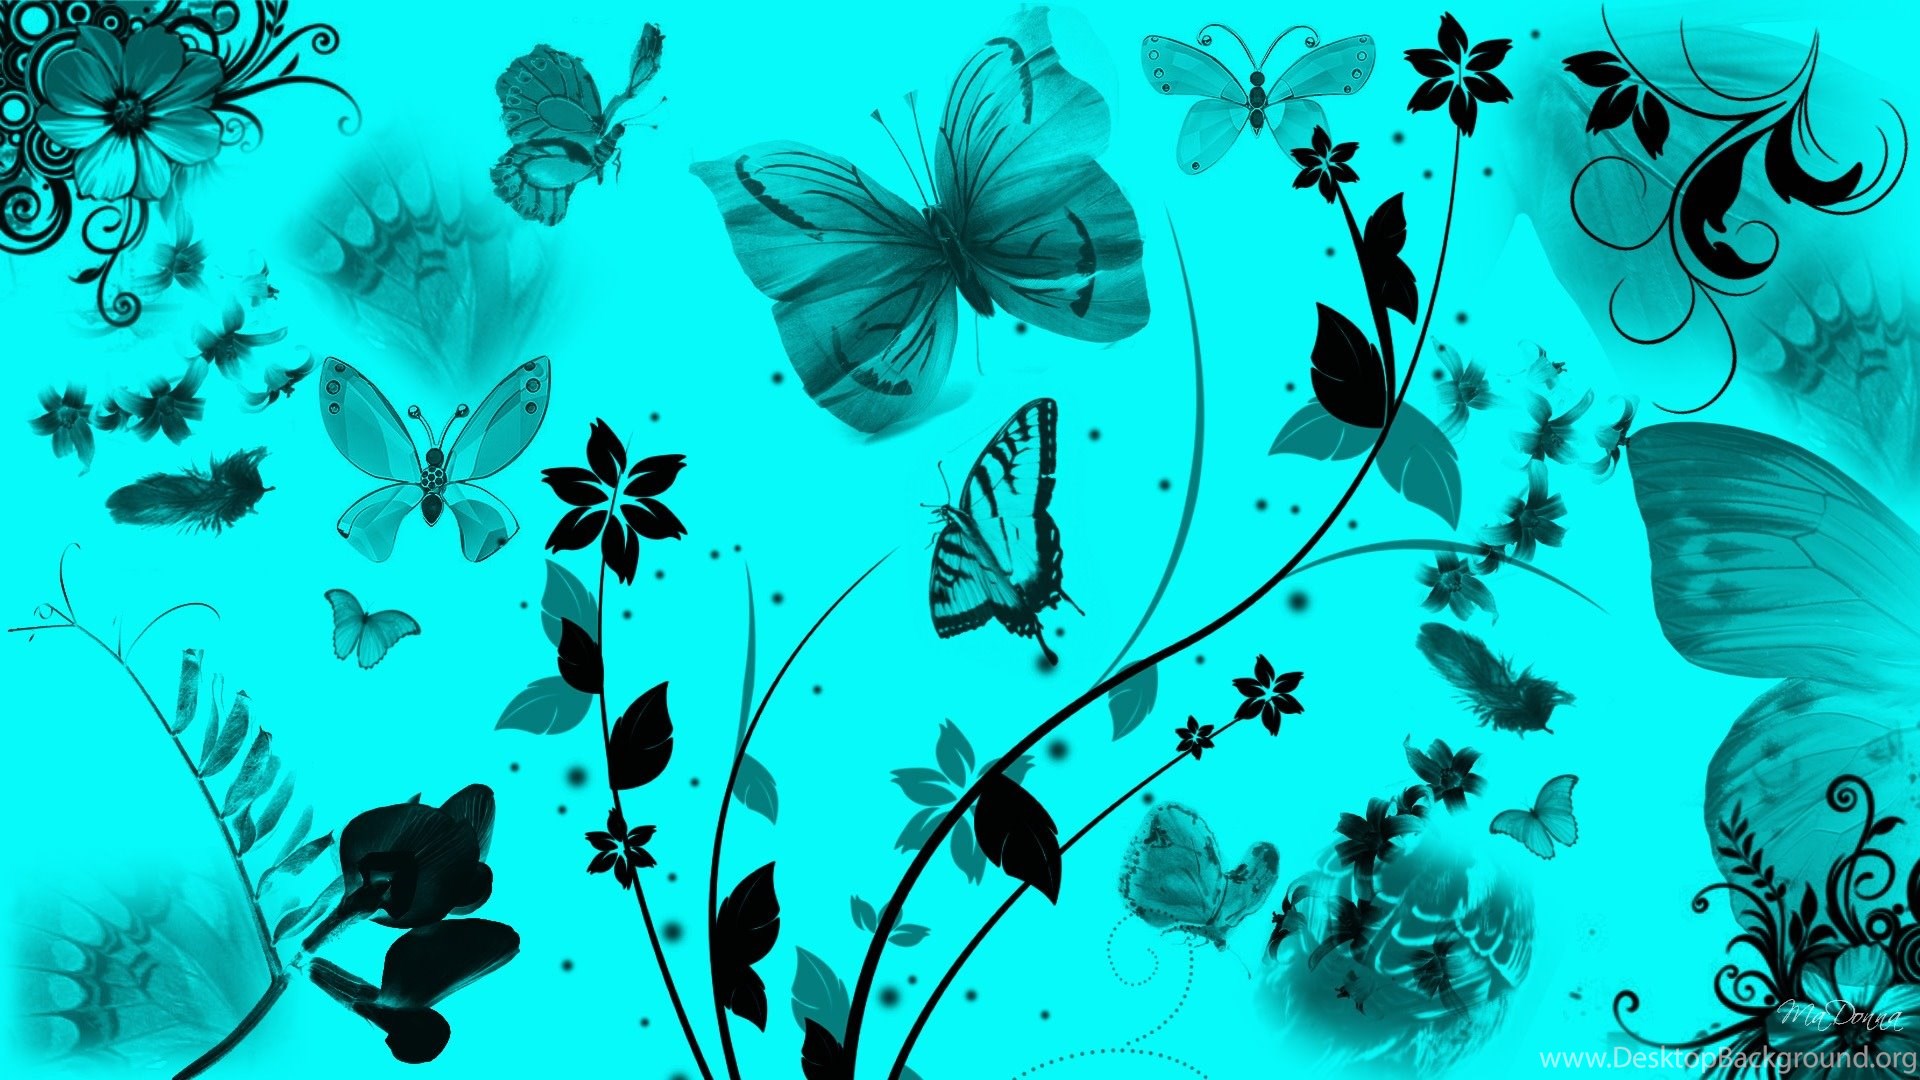 teal butterfly wallpaper,green,turquoise,teal,organism,leaf